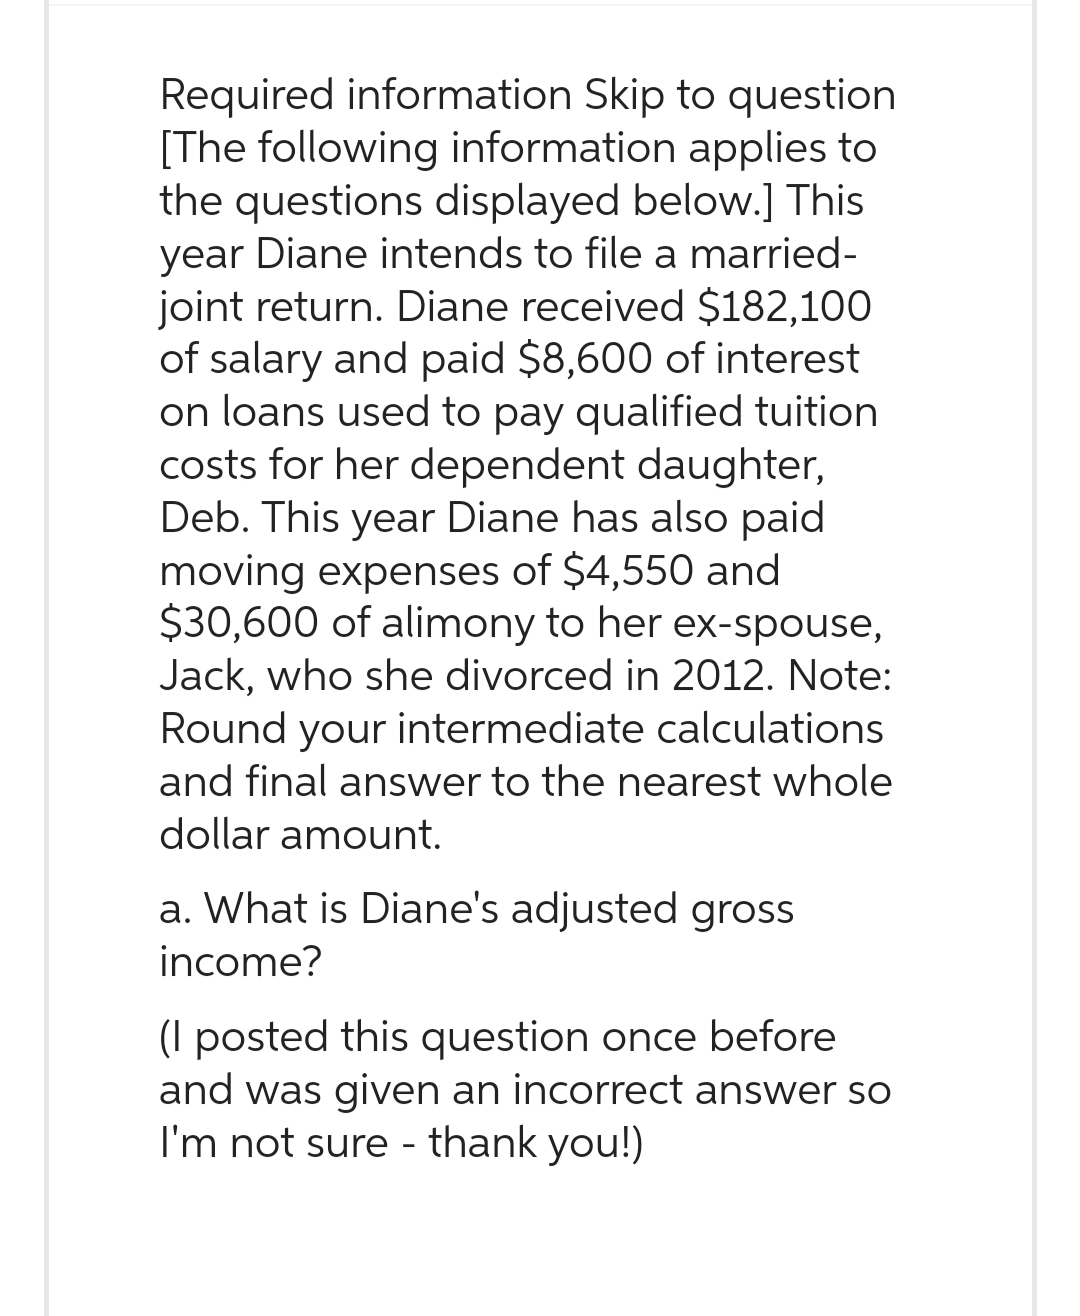 Required information Skip to question
[The following information applies to
the questions displayed below.] This
year Diane intends to file a married-
joint return. Diane received $182,100
of salary and paid $8,600 of interest
on loans used to pay qualified tuition
costs for her dependent daughter,
Deb. This year Diane has also paid
moving expenses of $4,550 and
$30,600 of alimony to her ex-spouse,
Jack, who she divorced in 2012. Note:
Round your intermediate calculations
and final answer to the nearest whole
dollar amount.
a. What is Diane's adjusted gross
income?
(I posted this question once before
and was given an incorrect answer so
I'm not sure - thank you!)